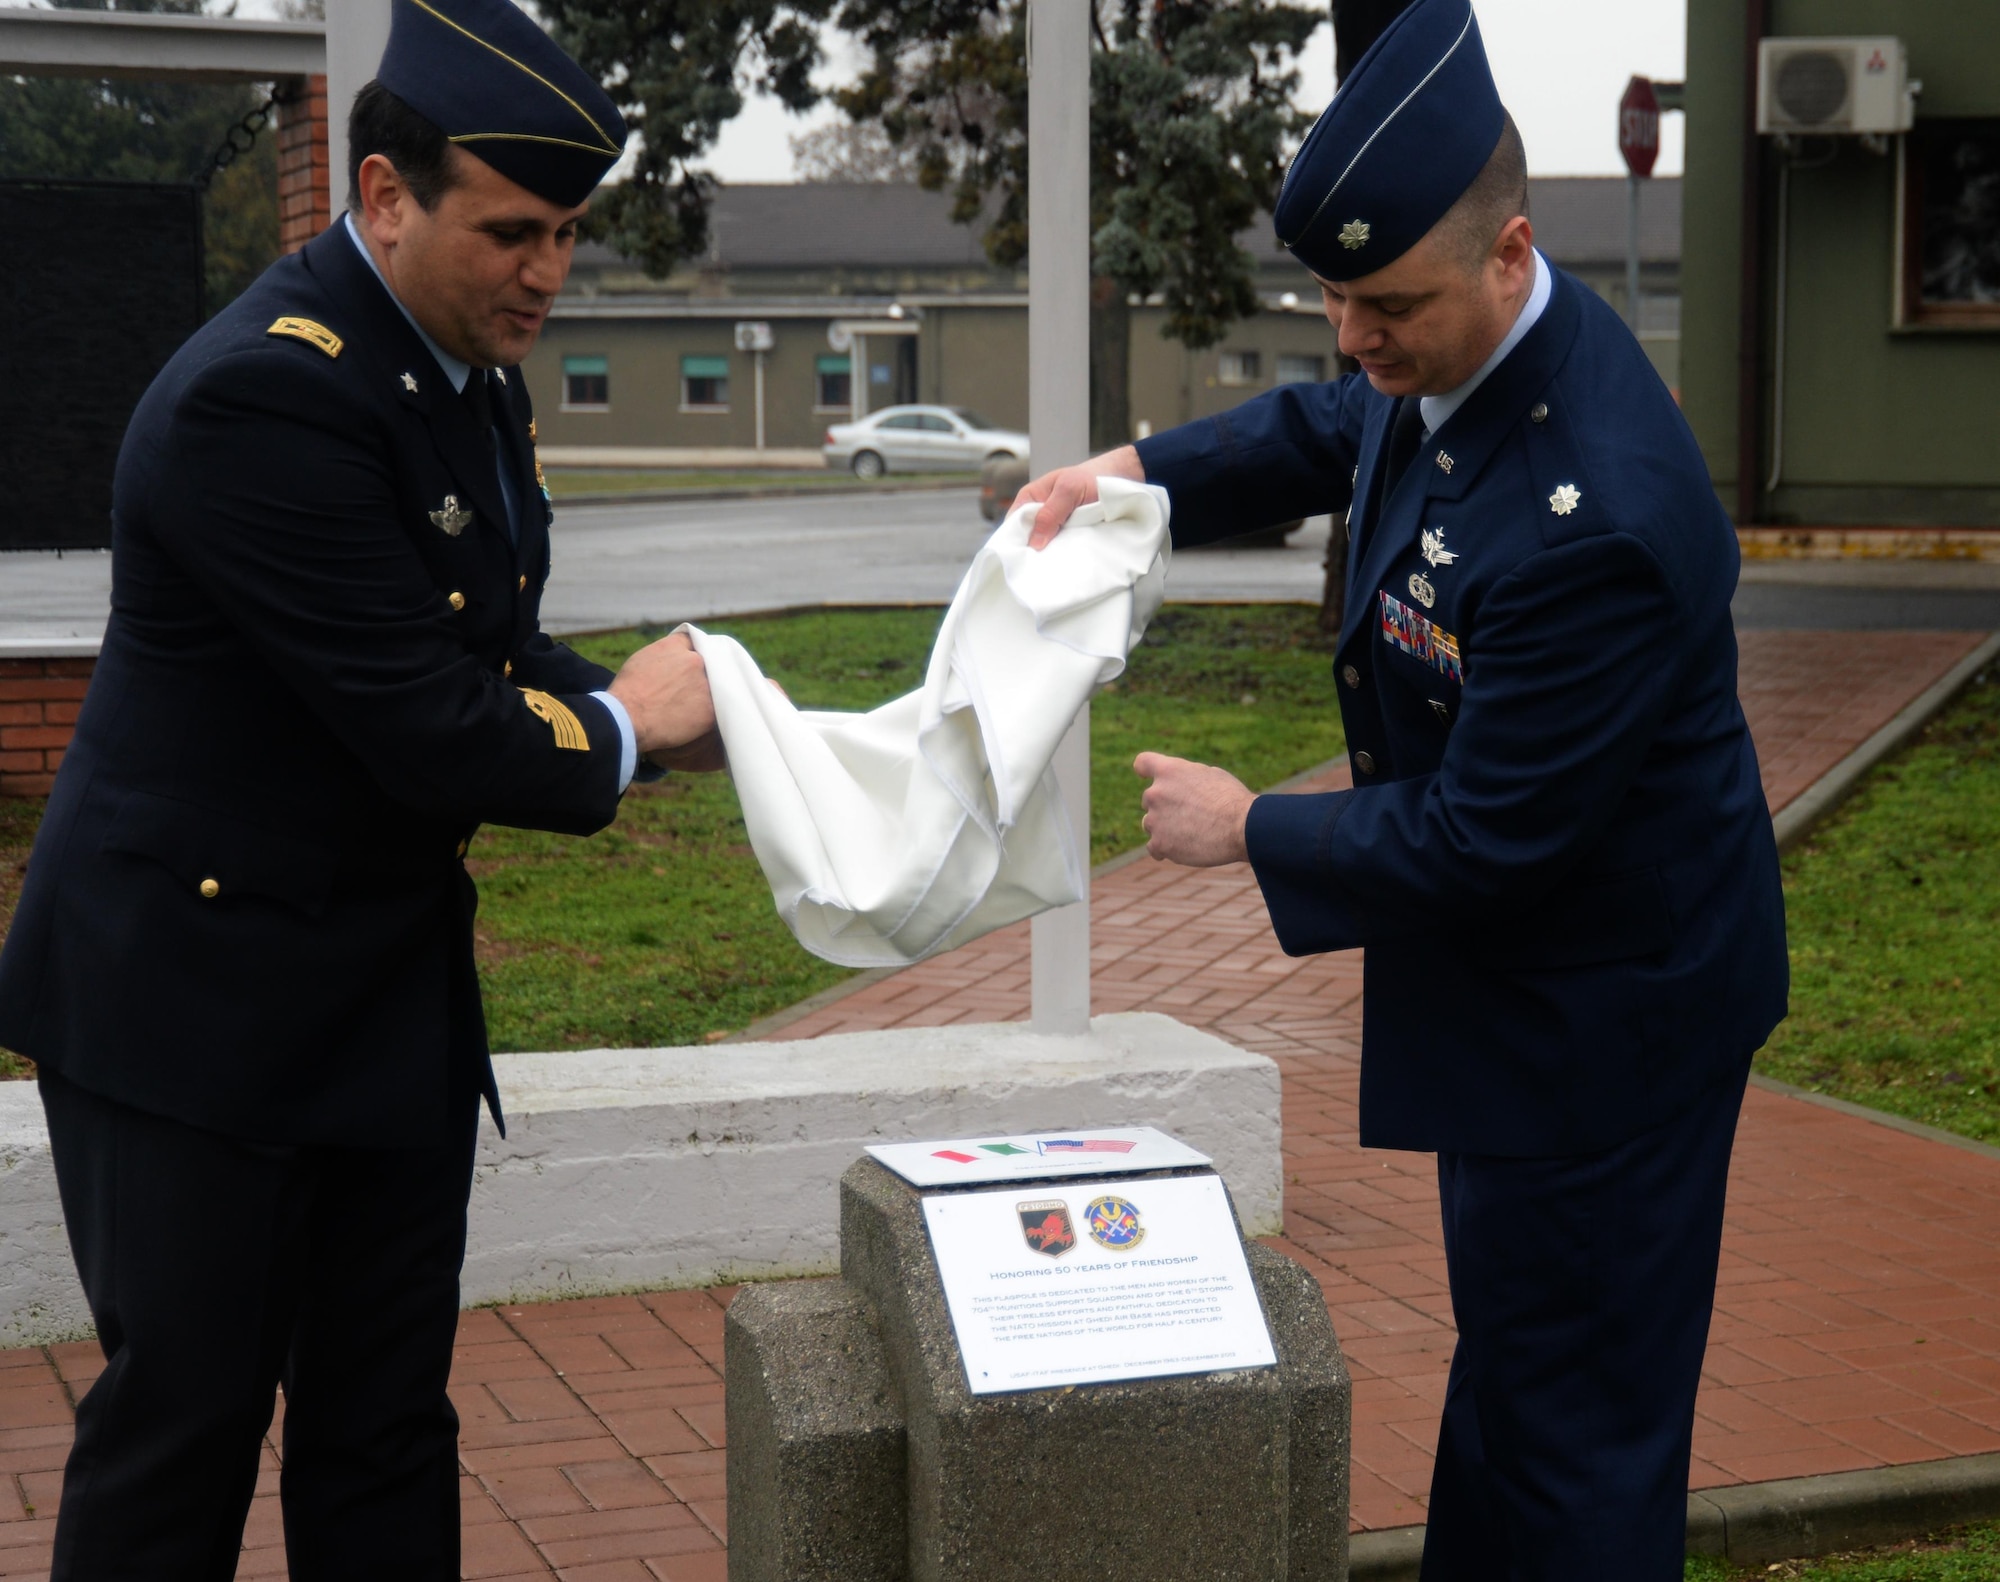 Italian Air Force Colonel Andrea Di Pietro, commander of 6th STORMO, and U.S. Air Force Lt. Col. James Soles, commander of the 704th Munitions Support Squadron, unveil a plaque near the U.S., Italian and NATO flagpoles outside during a rededication ceremony at Ghedi Air Base, Italy, Jan. 31, 2014. Both the 704th MUNSS and 6th STORMO carried out the rededication to honor the 50th anniversary of the Italian-American partnership at the air base.  (U.S. Air Force photo/Staff Sgt. Joe W. McFadden)